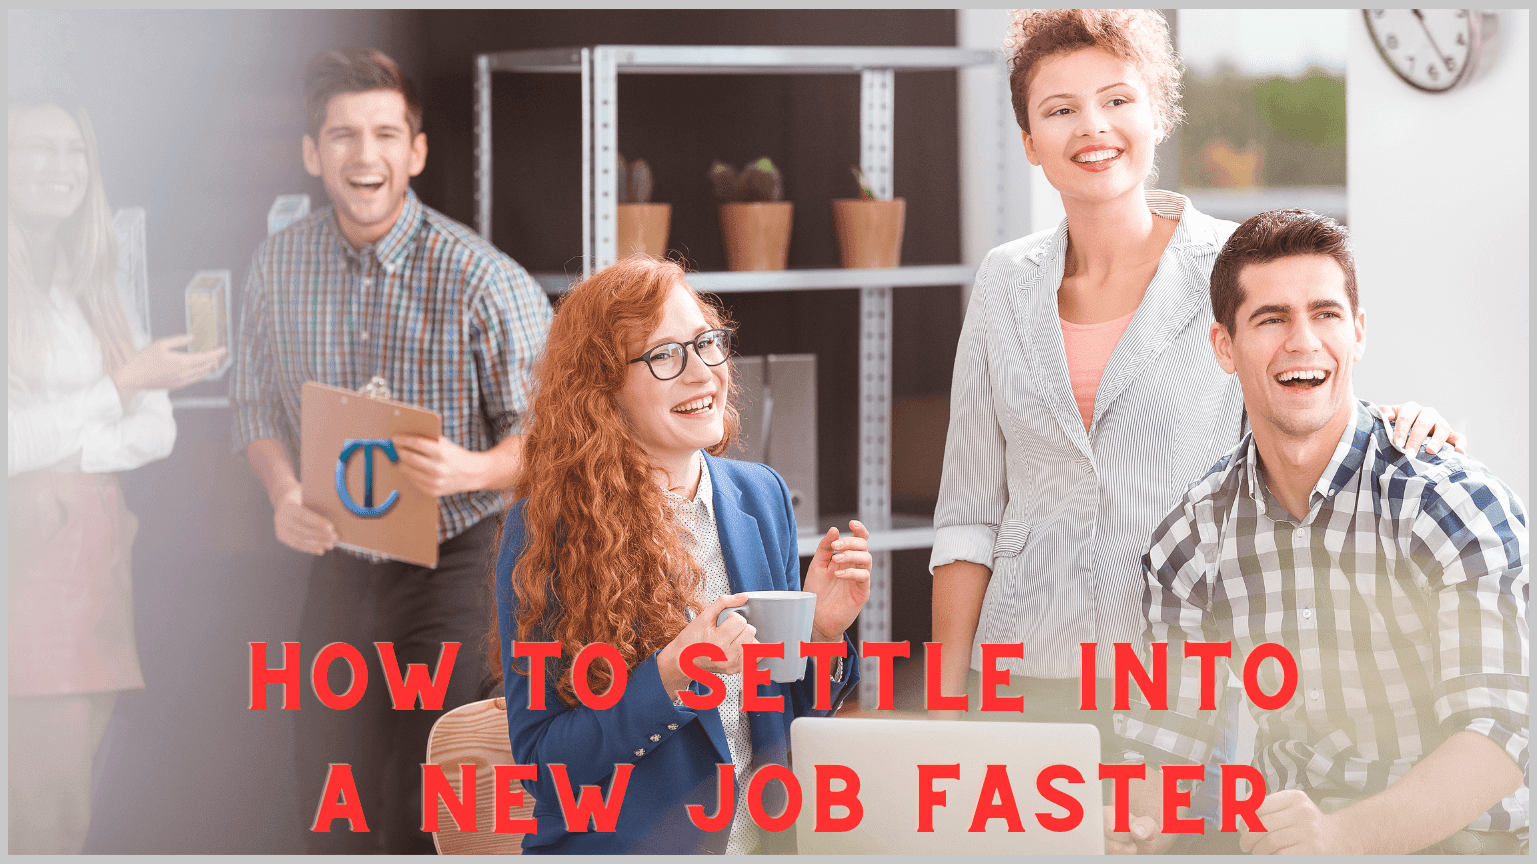 How to fit into a new job faster